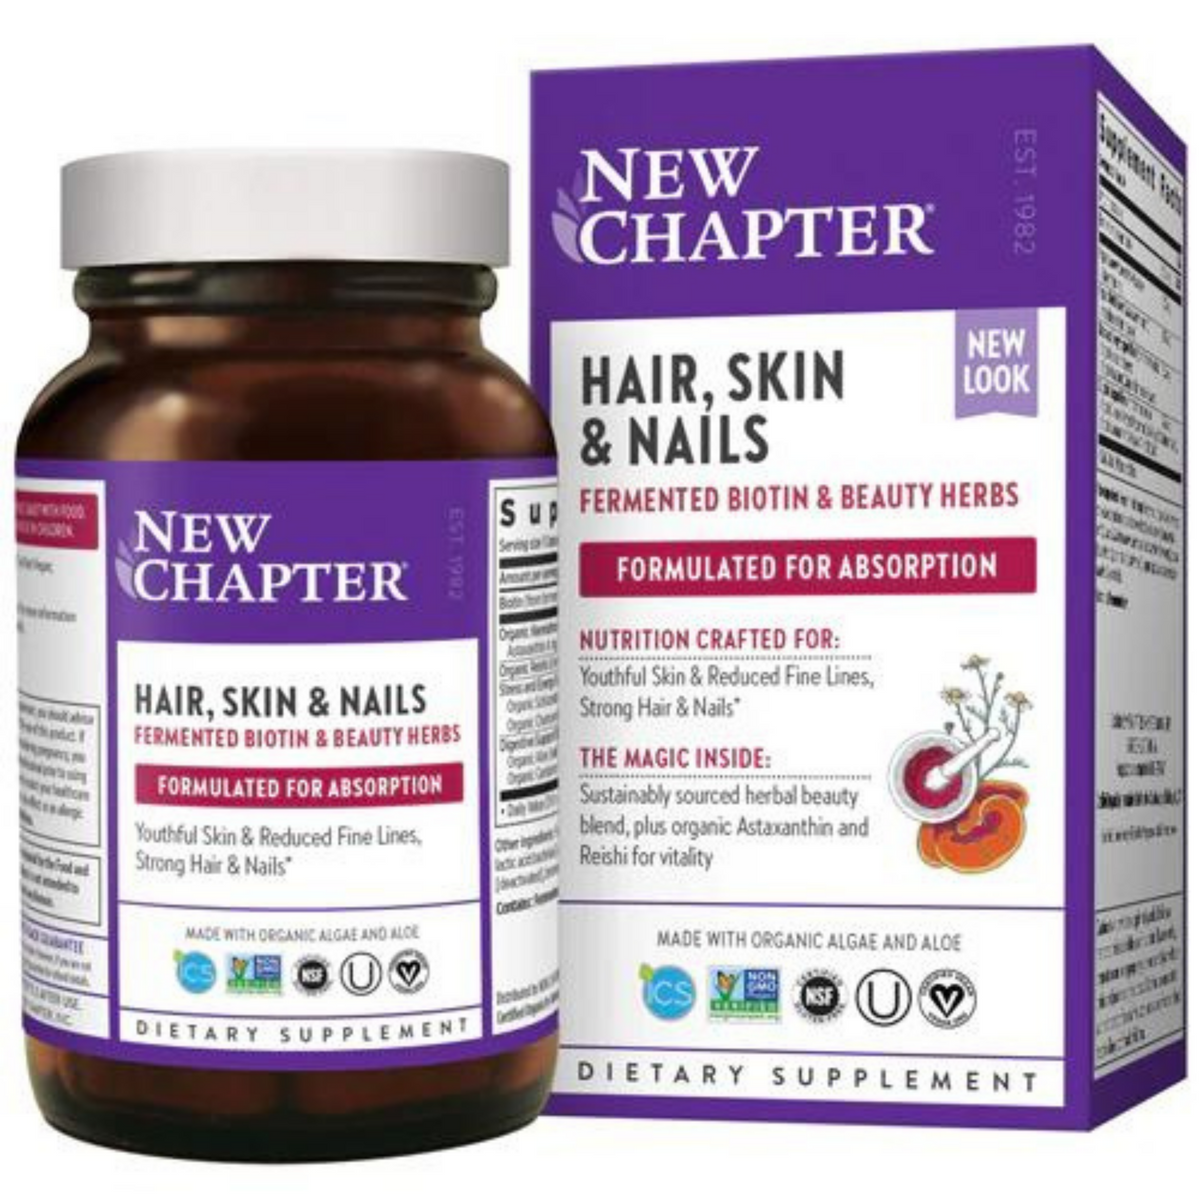 Simply Potent Hair Skin and Nails Vitamins, 28 Ingredient Anti-Aging  Natural Supplement, Biotin 5000mcg for Hair & Nails, Keratin & MSM for Hair  Growth, Collagen & Hyaluronic Acid for Skin, 60 Tablets -